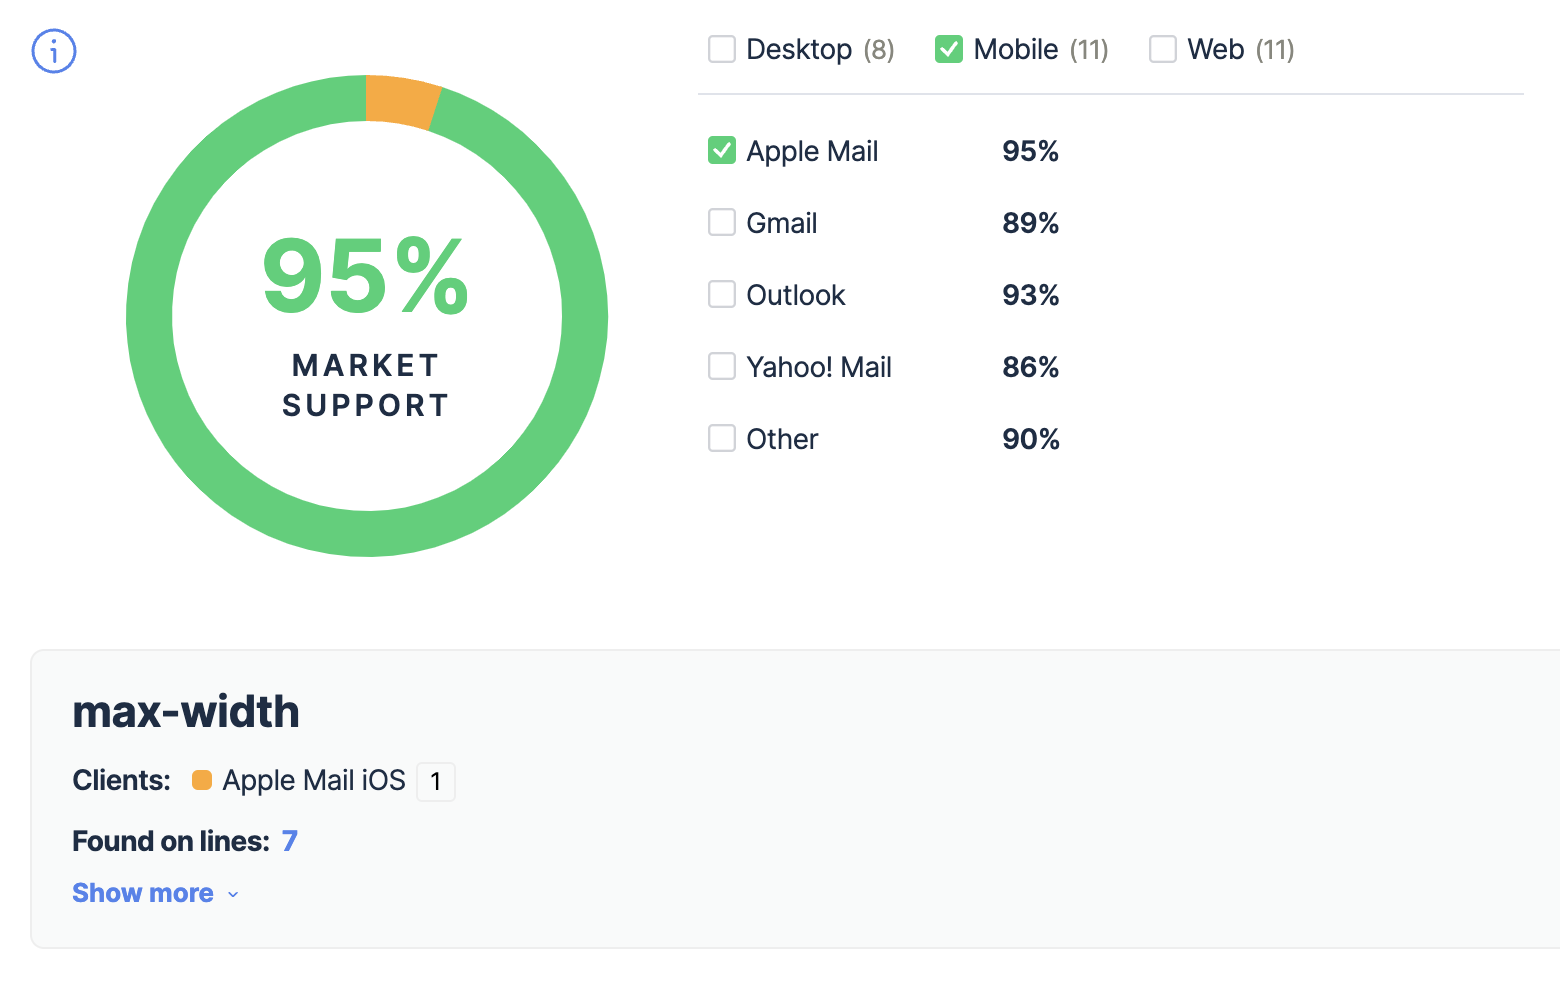 Mailtrap Email Testing market support score example for Apple Mail on mobile